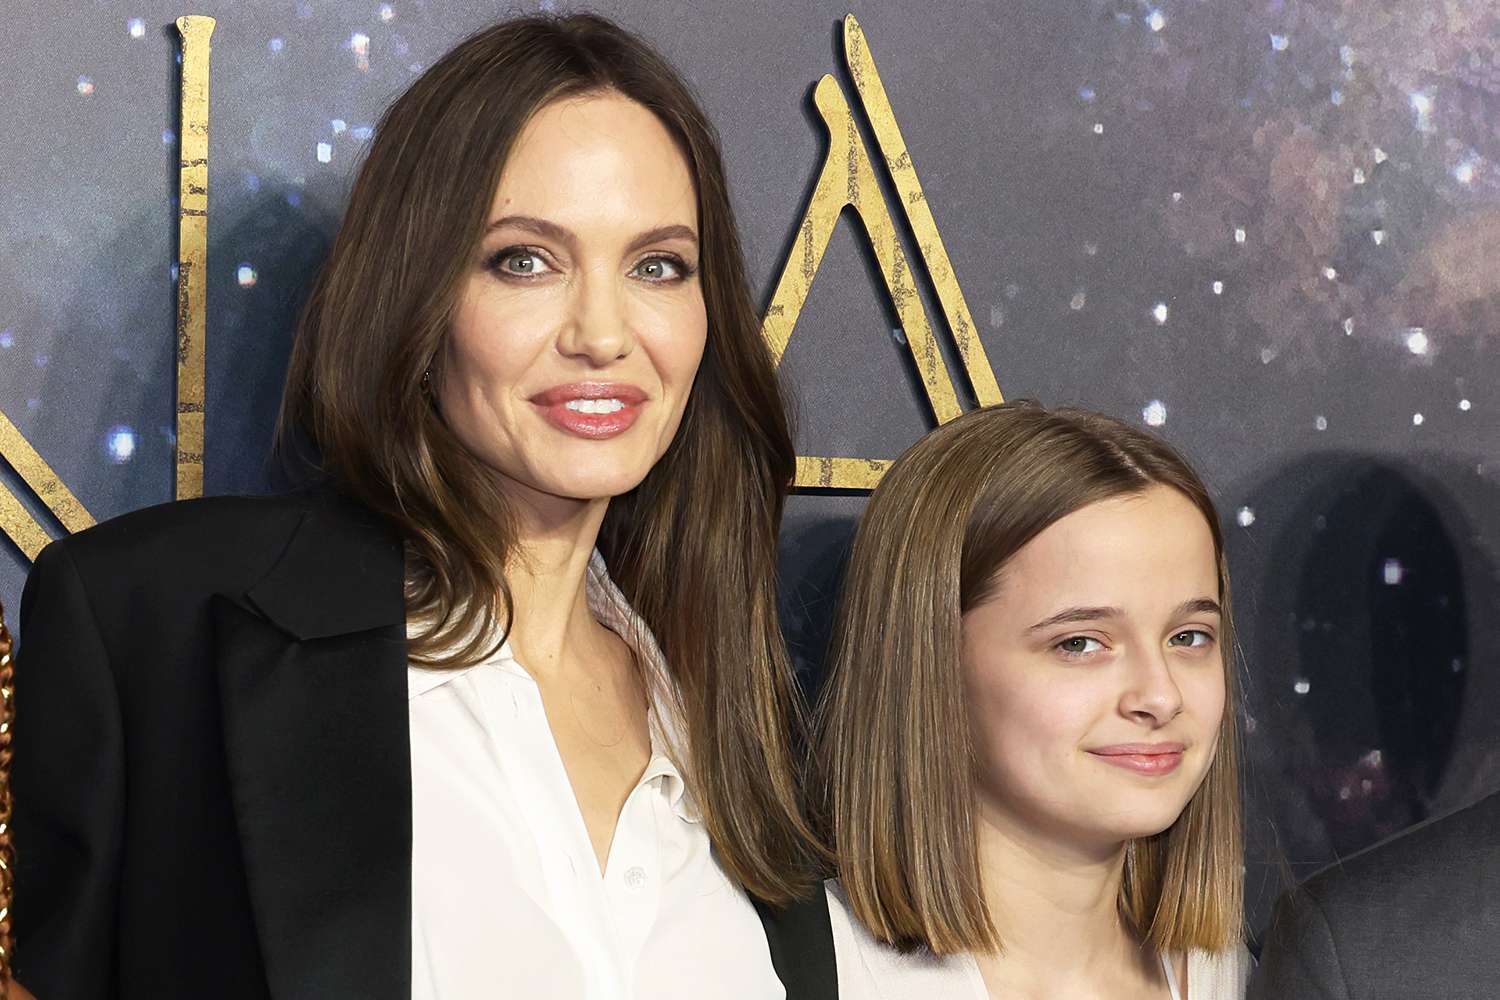 Angelina Jolie and Vivienne Jolie-Pitt attends the "The Eternals" UK Premiere at BFI IMAX Waterloo on October 27, 2021 in London, England.